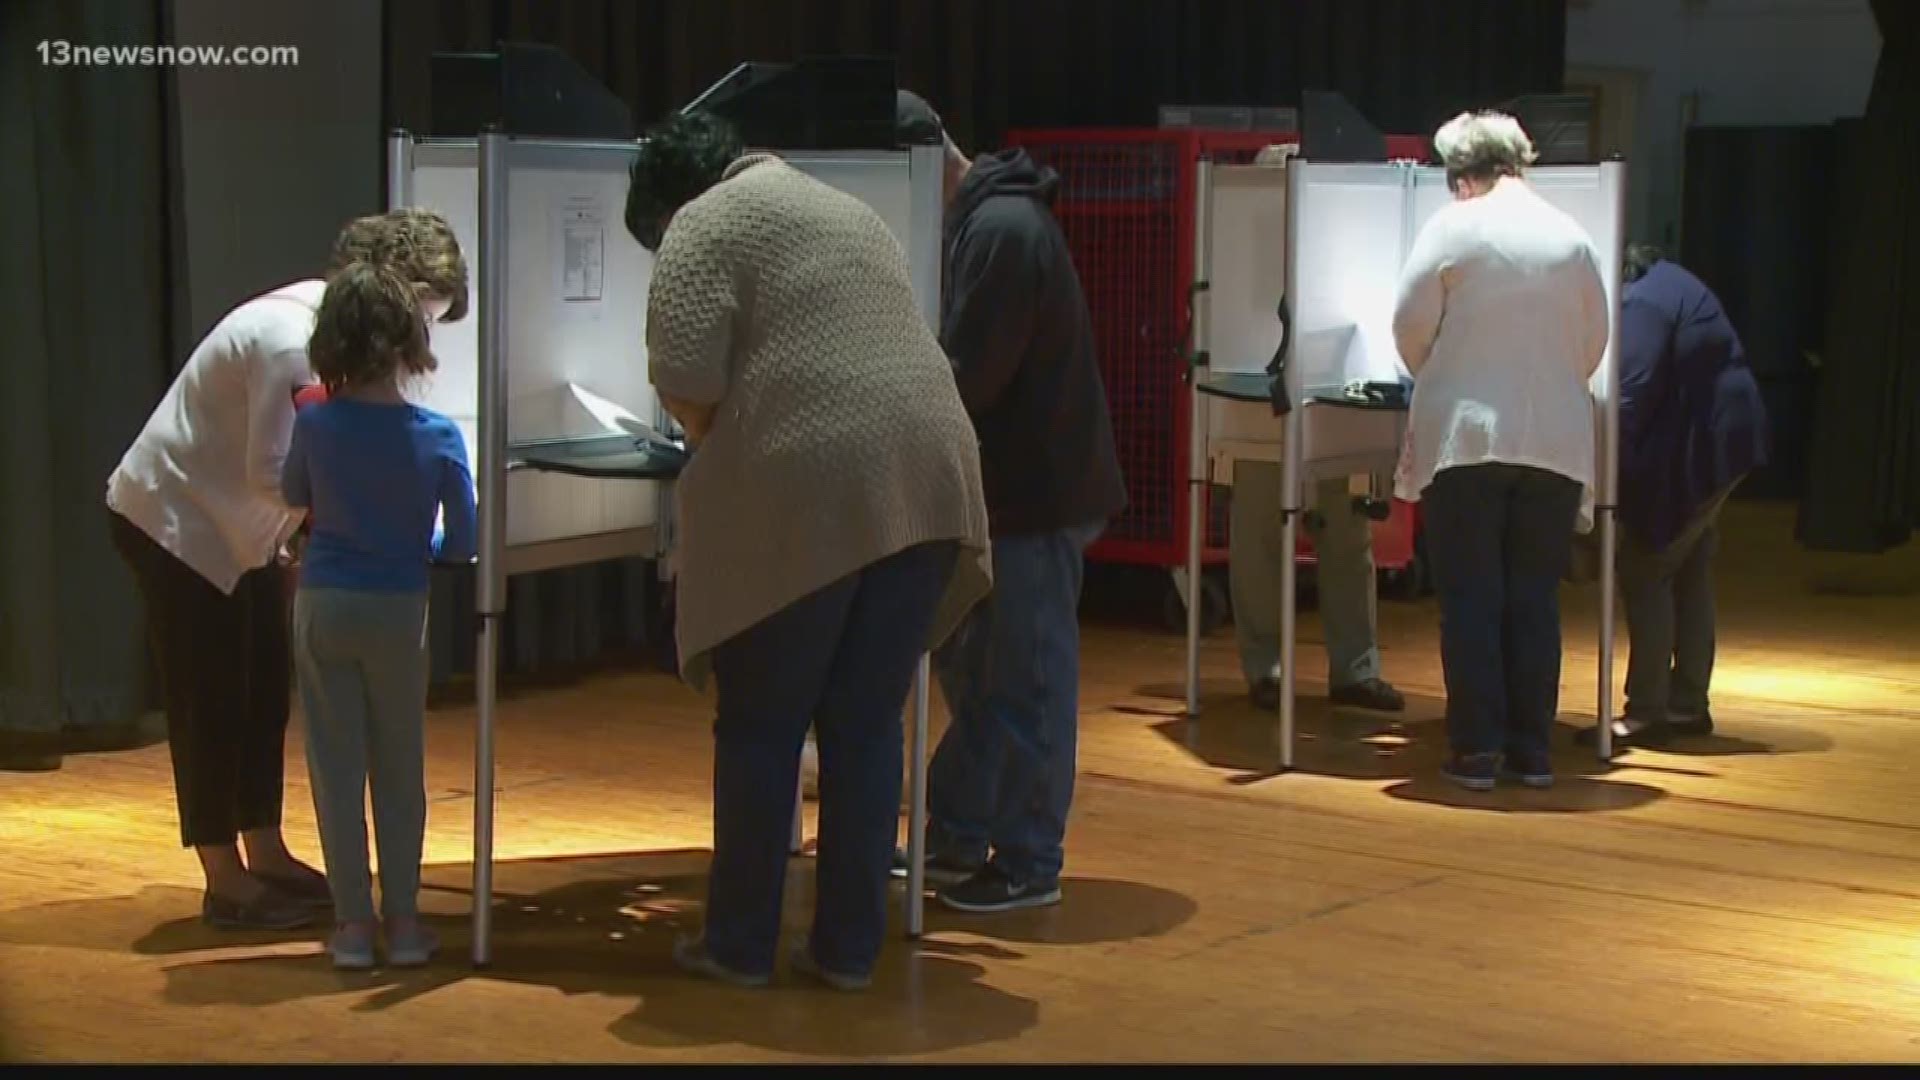 Voters who went to the polls at Western Branch Middle School discovered they had received the wrong ballots on Tuesday morning. The city's general registrar said the issue has been fixed.